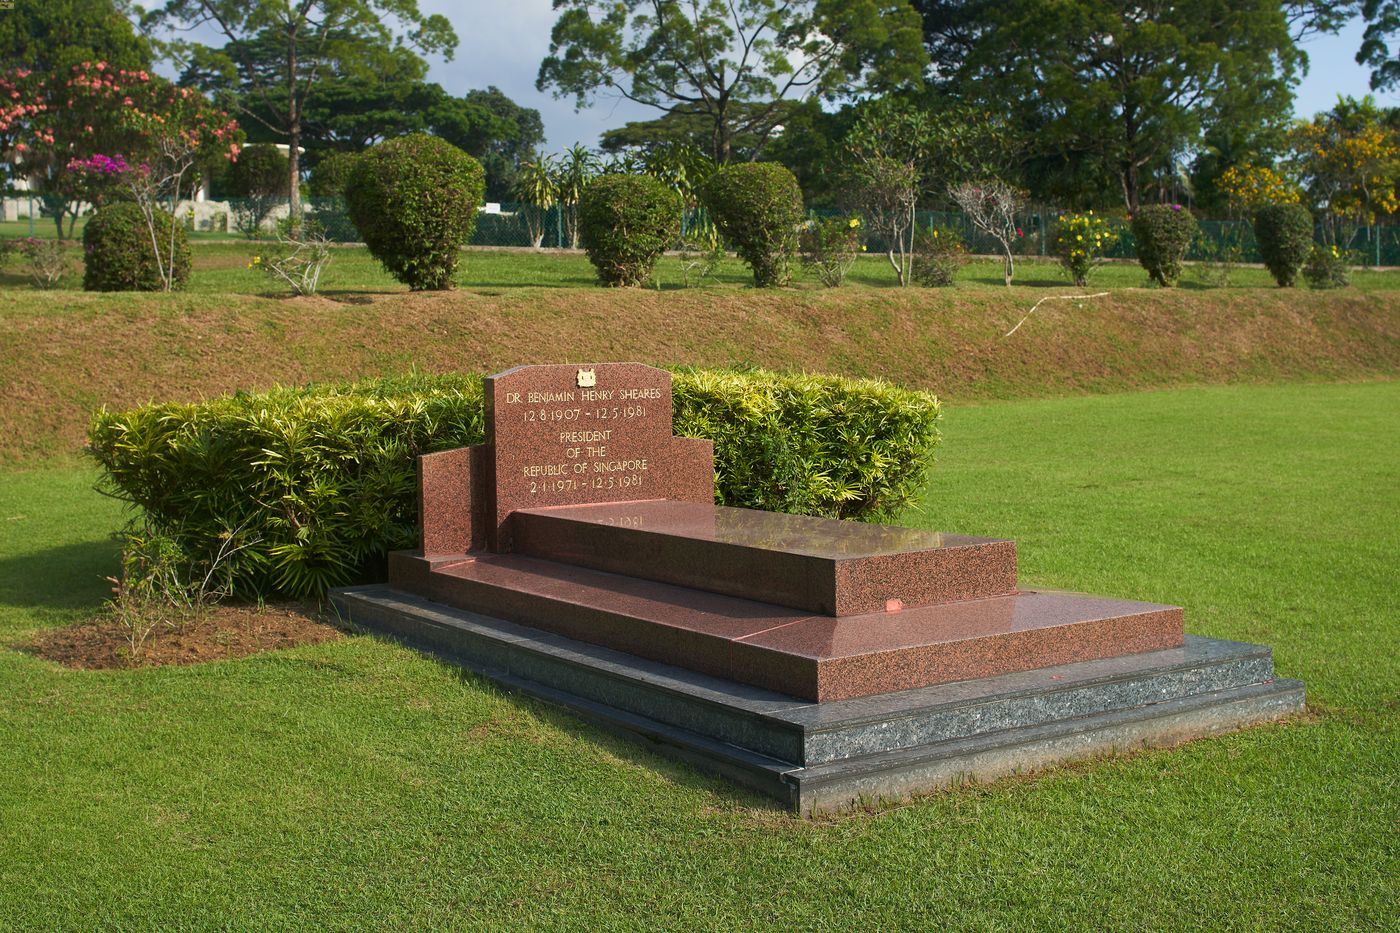 Two cemeteries of national significance are housed at this site: Kranji War Cemetery is a burial site for soldiers who died defending Singapore and Malaya during World War II, and Kranji State Cemetery is a burial site for two former presidents of Singapore.